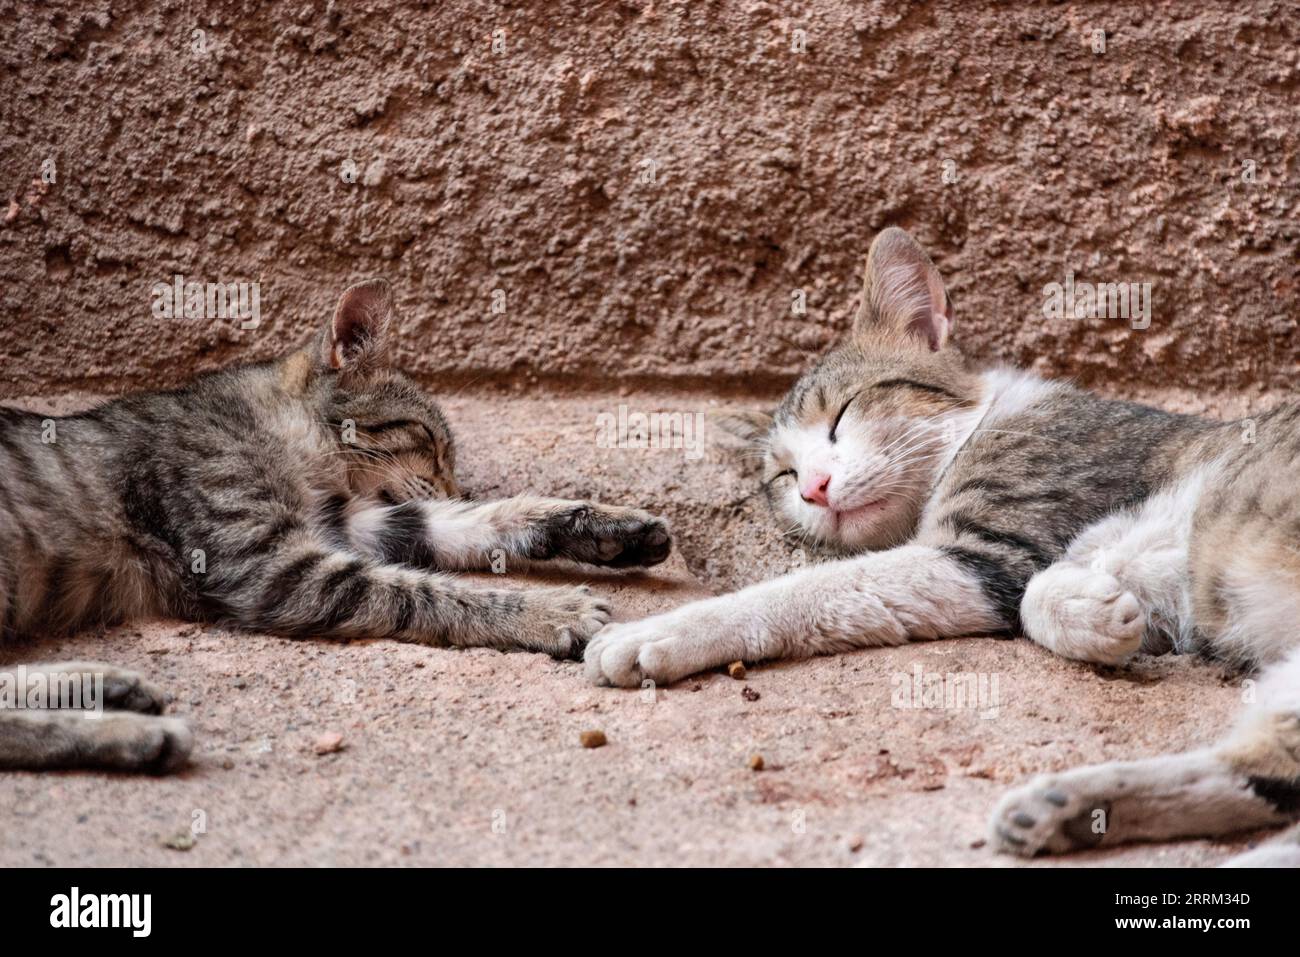 Two street cats sleeping together in the medina of Marrakech, Morocco Stock Photo